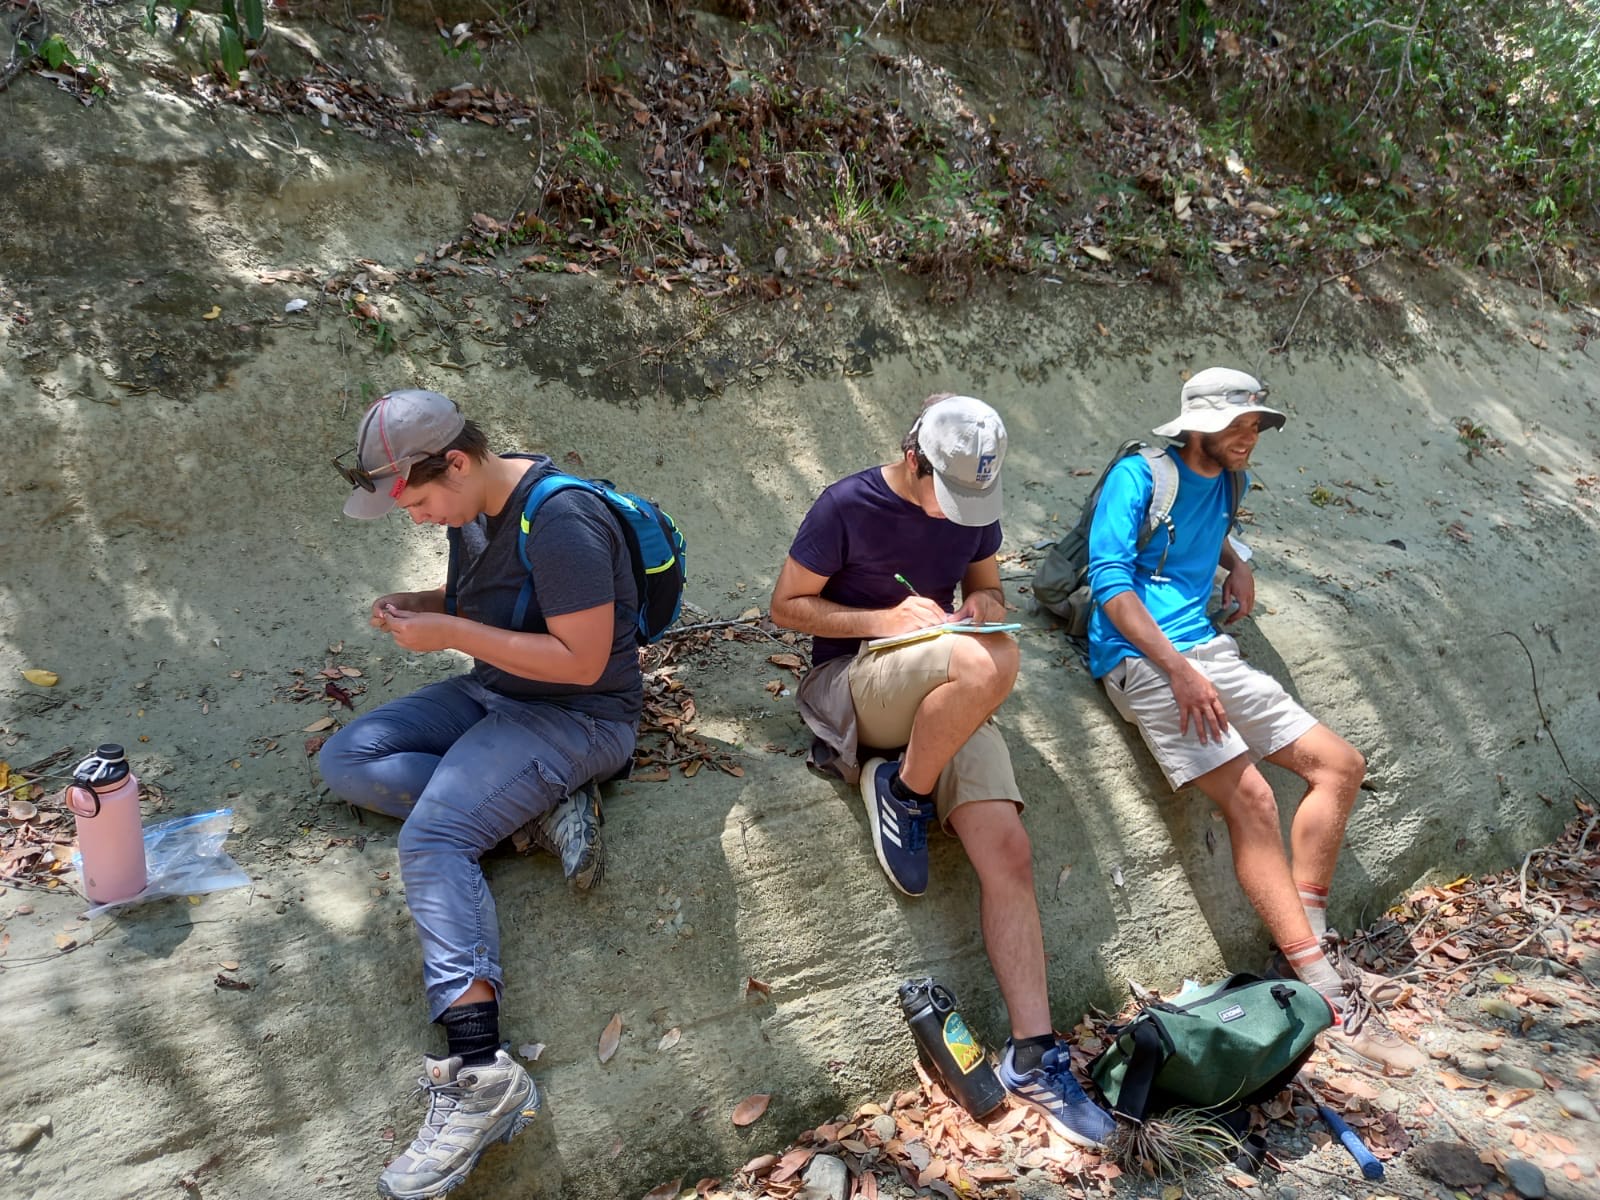 Graduate students Carmi Milagros Thompson, Lazaro Viñola Lopez and Mitchell Riegler rest on a rock face to check notes and observe fossils at a field site in the Dominican Republic